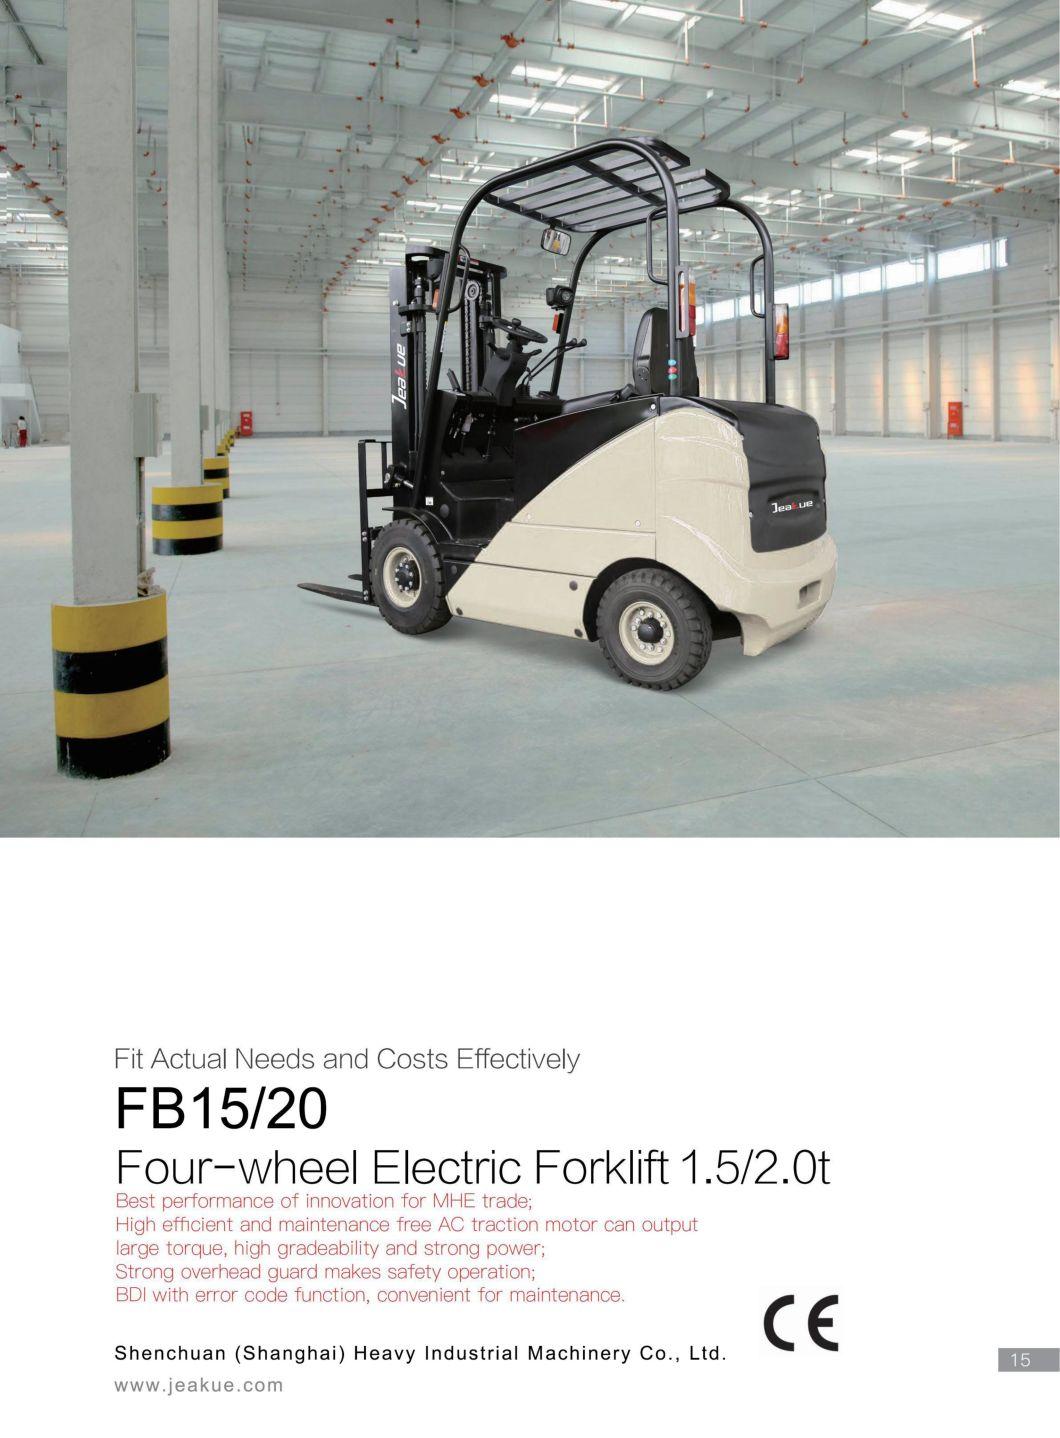 Mini Forklift 1.5 Ton 2ton Small Turning Radius Electric Battery Pallet Trucks Forklift Factory Used